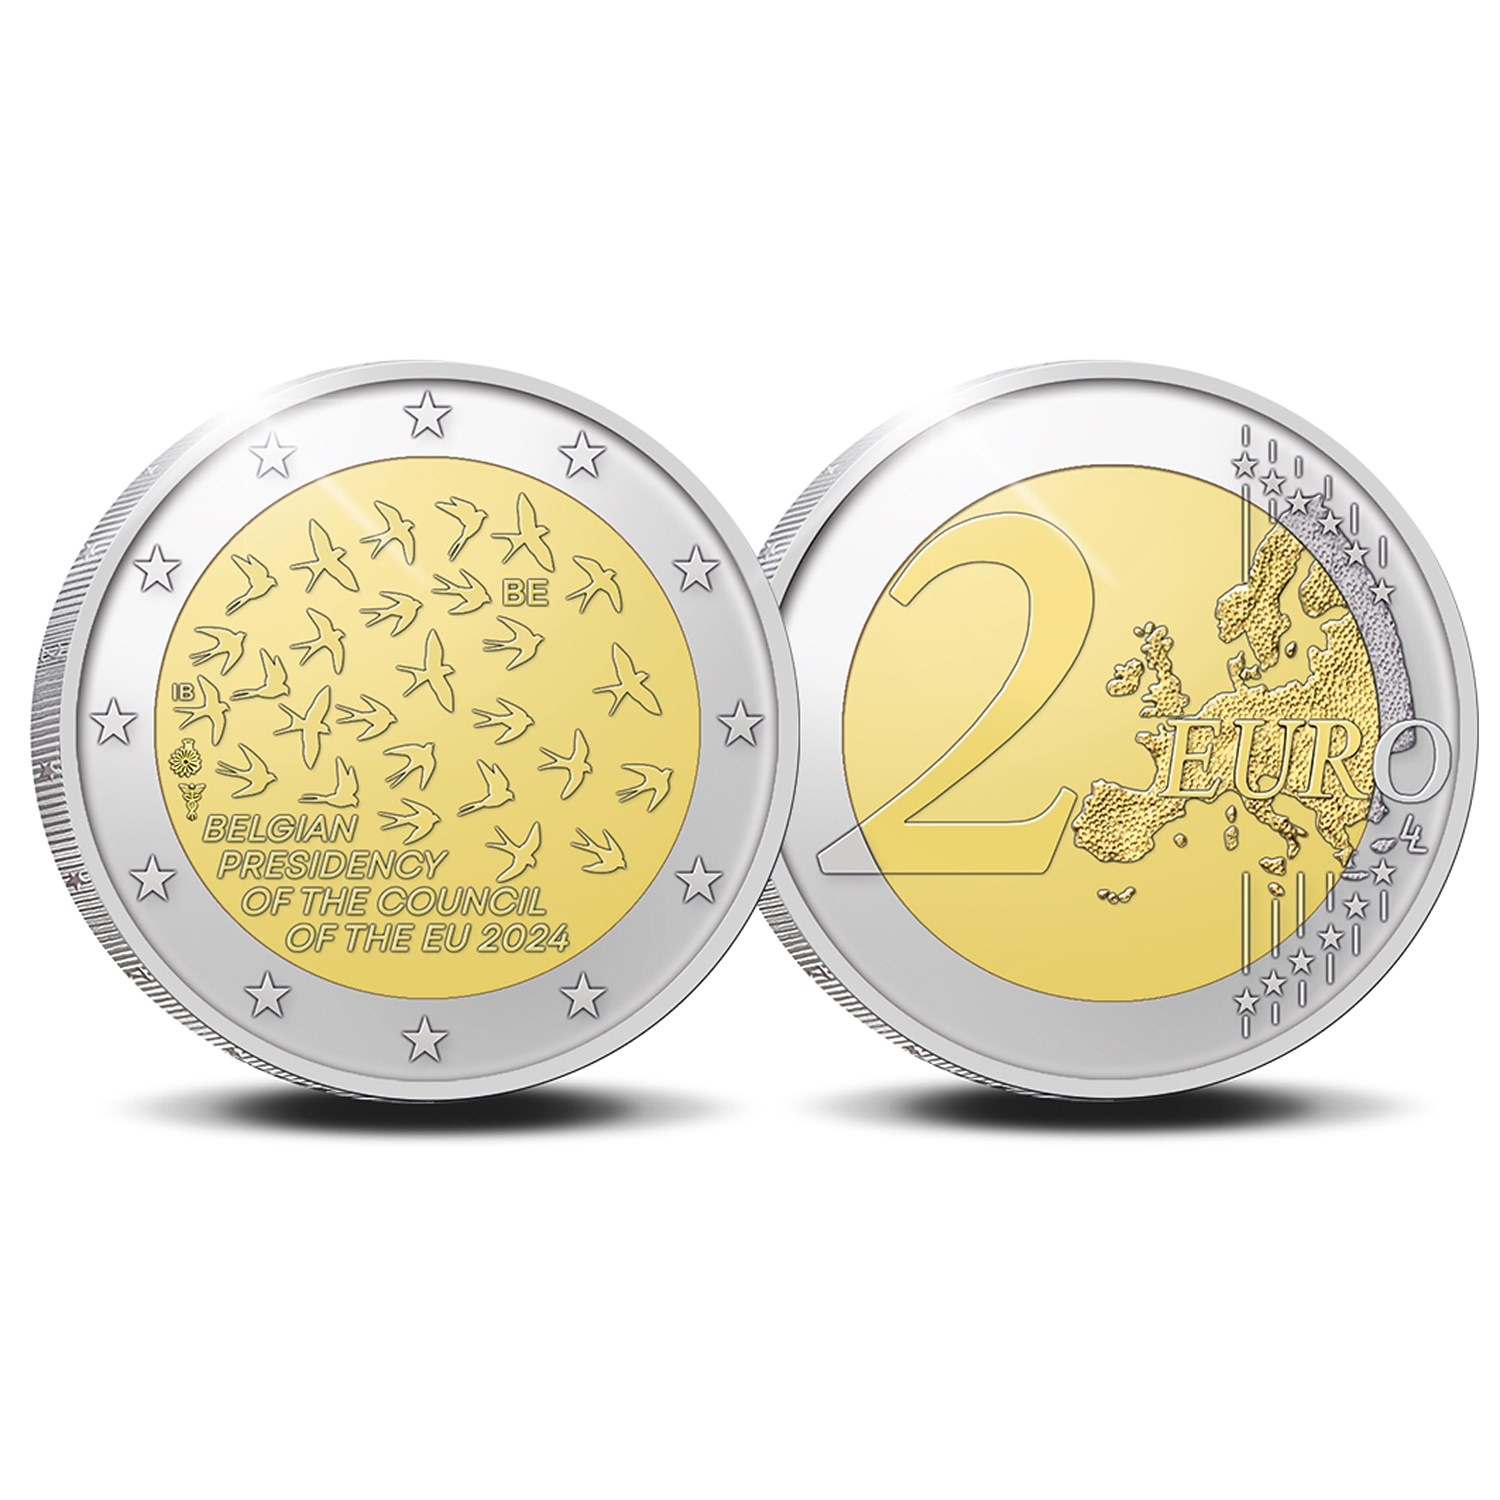 (EUR02.Proof.2024.0117861) 2 € coin Belgium 2024 Proof - Presidency of the Council of the European Union (zoom)